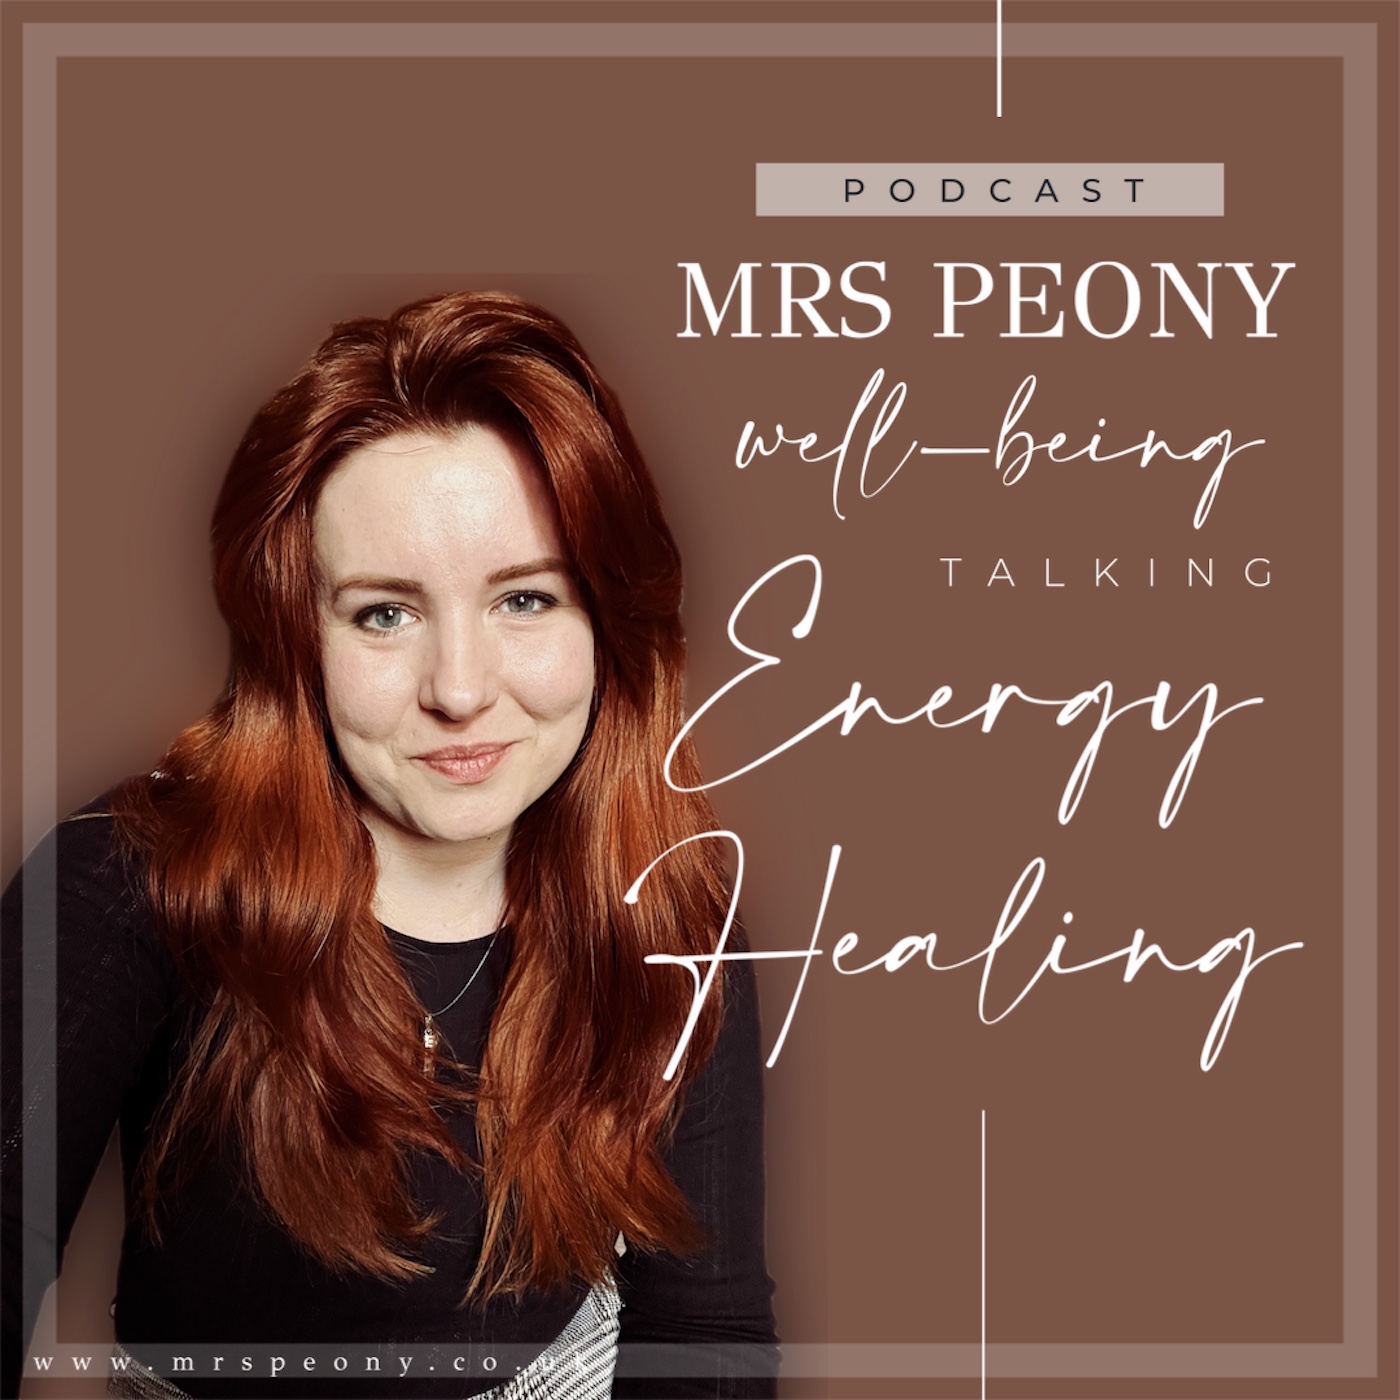 Podcast Mrs Peony Wellbeing